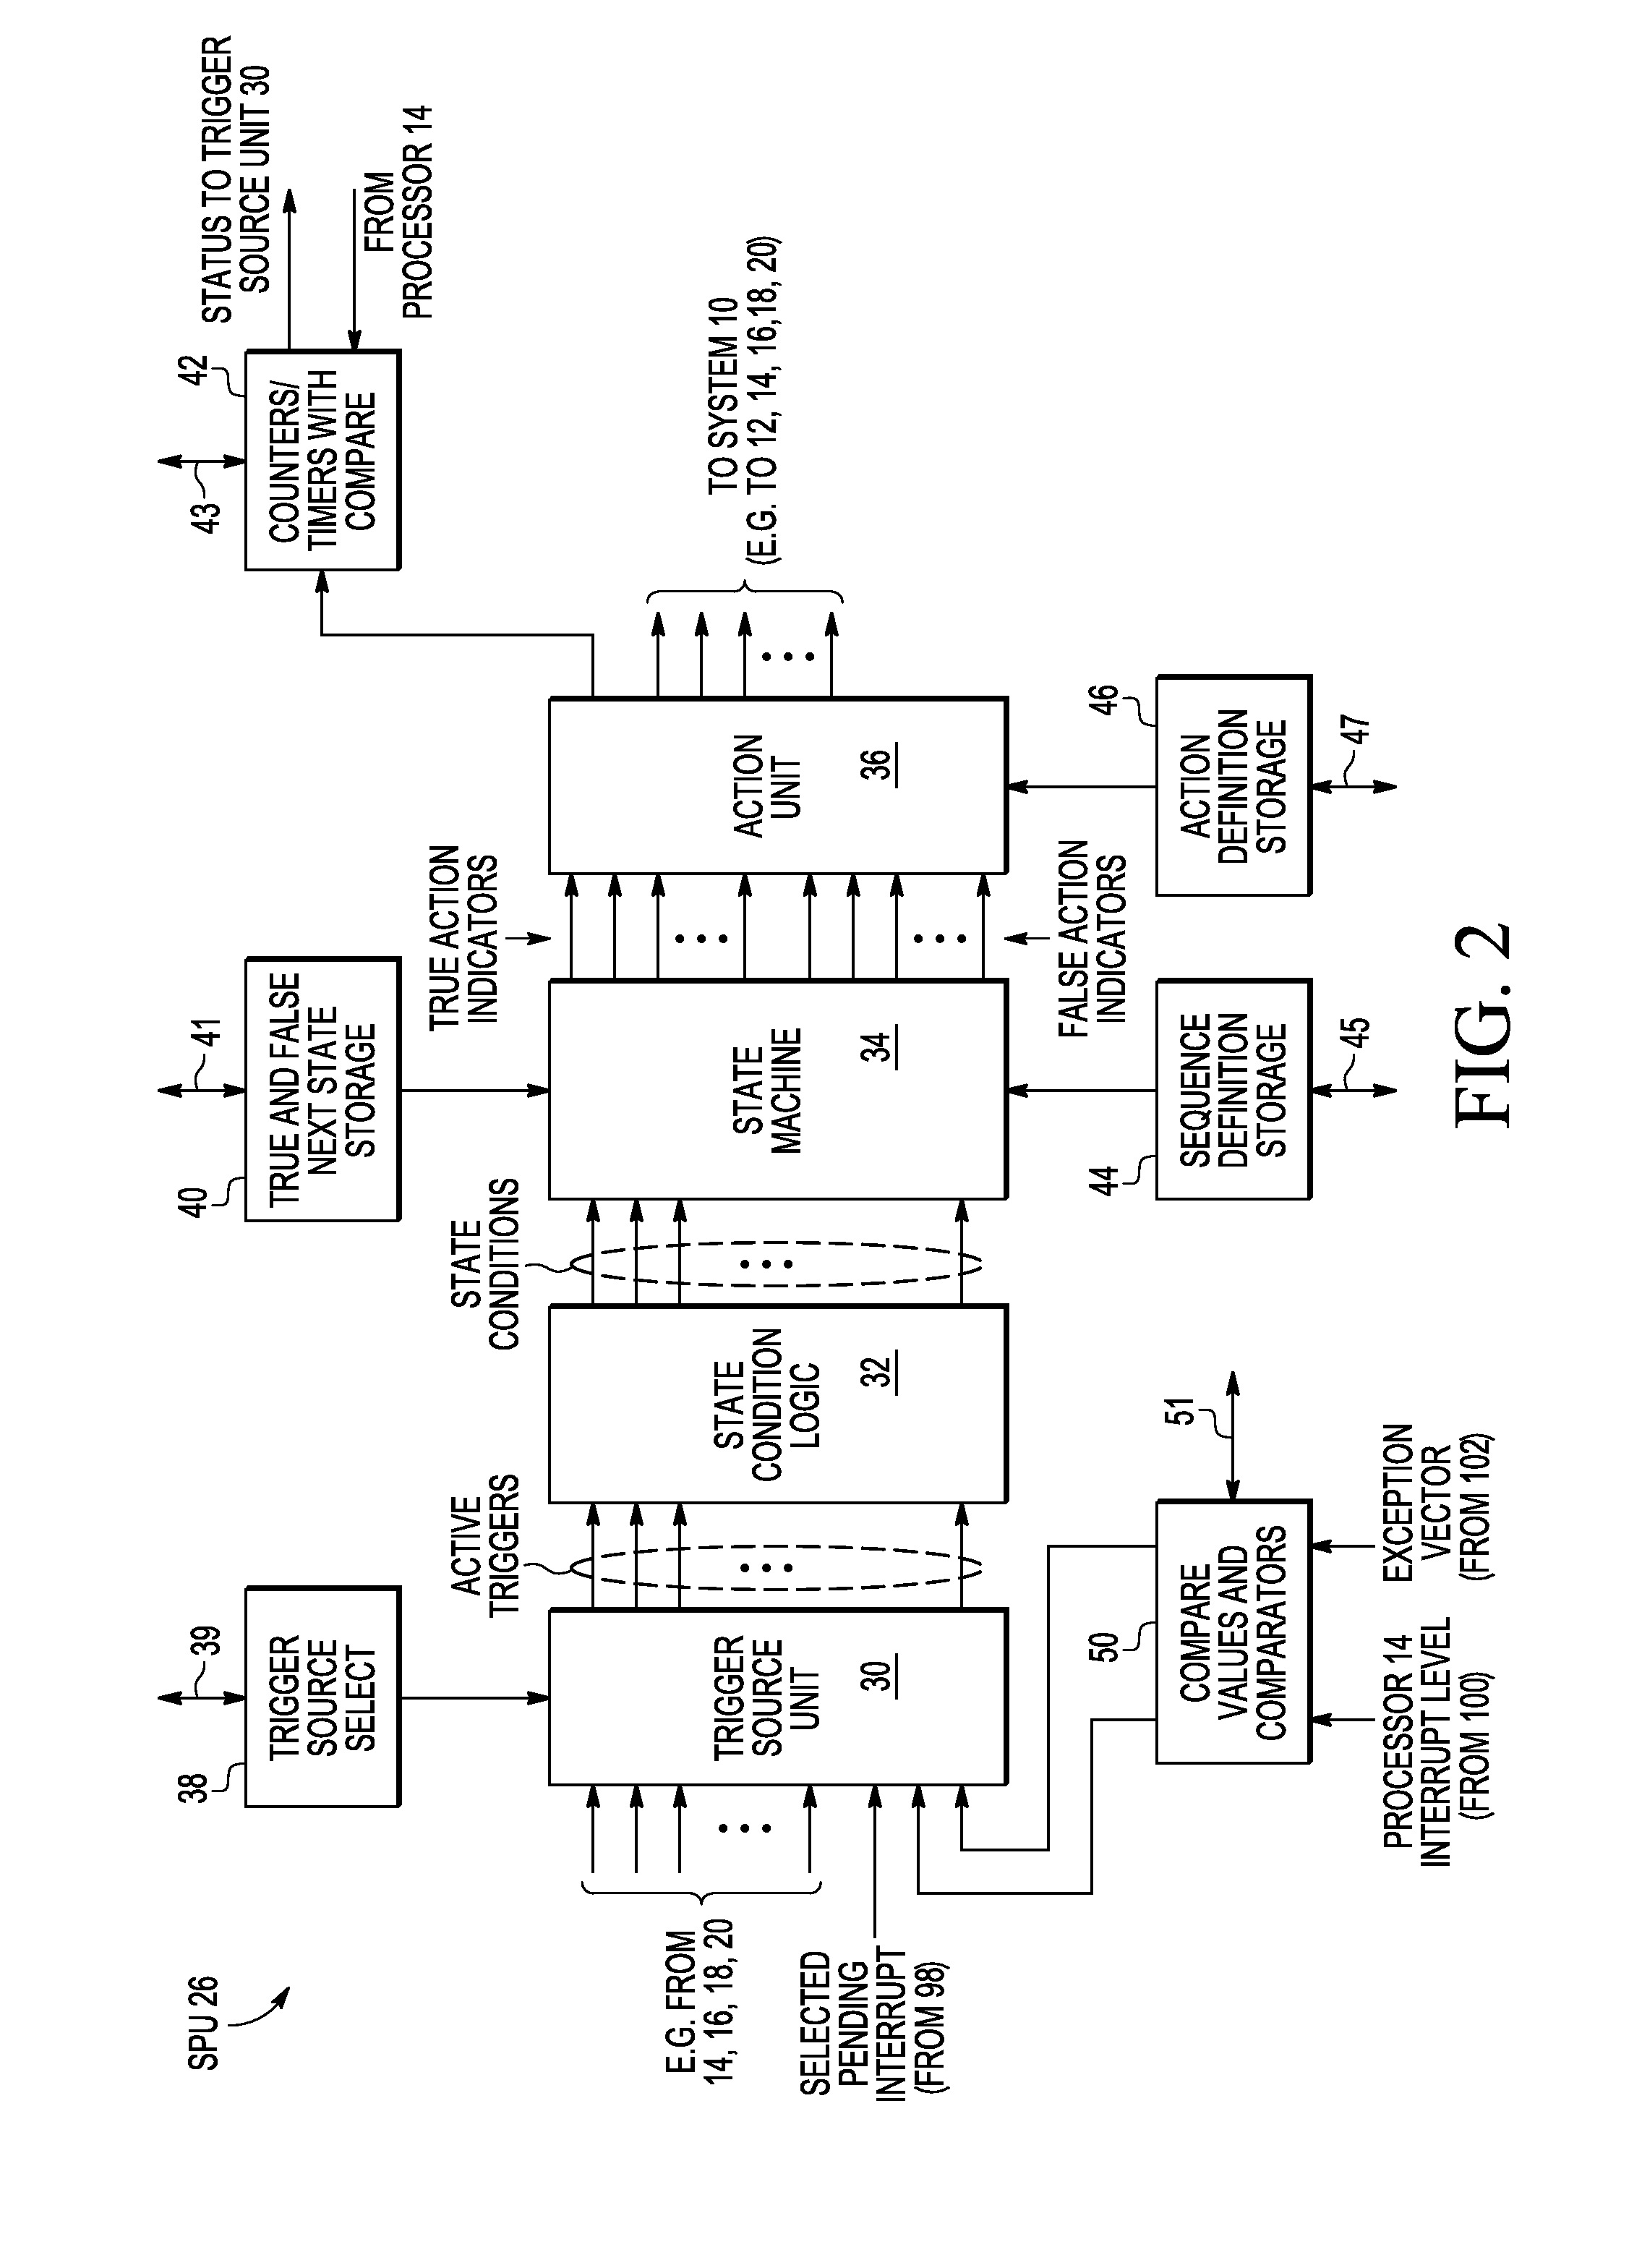 Data processing system having a sequence processing unit and method of operation